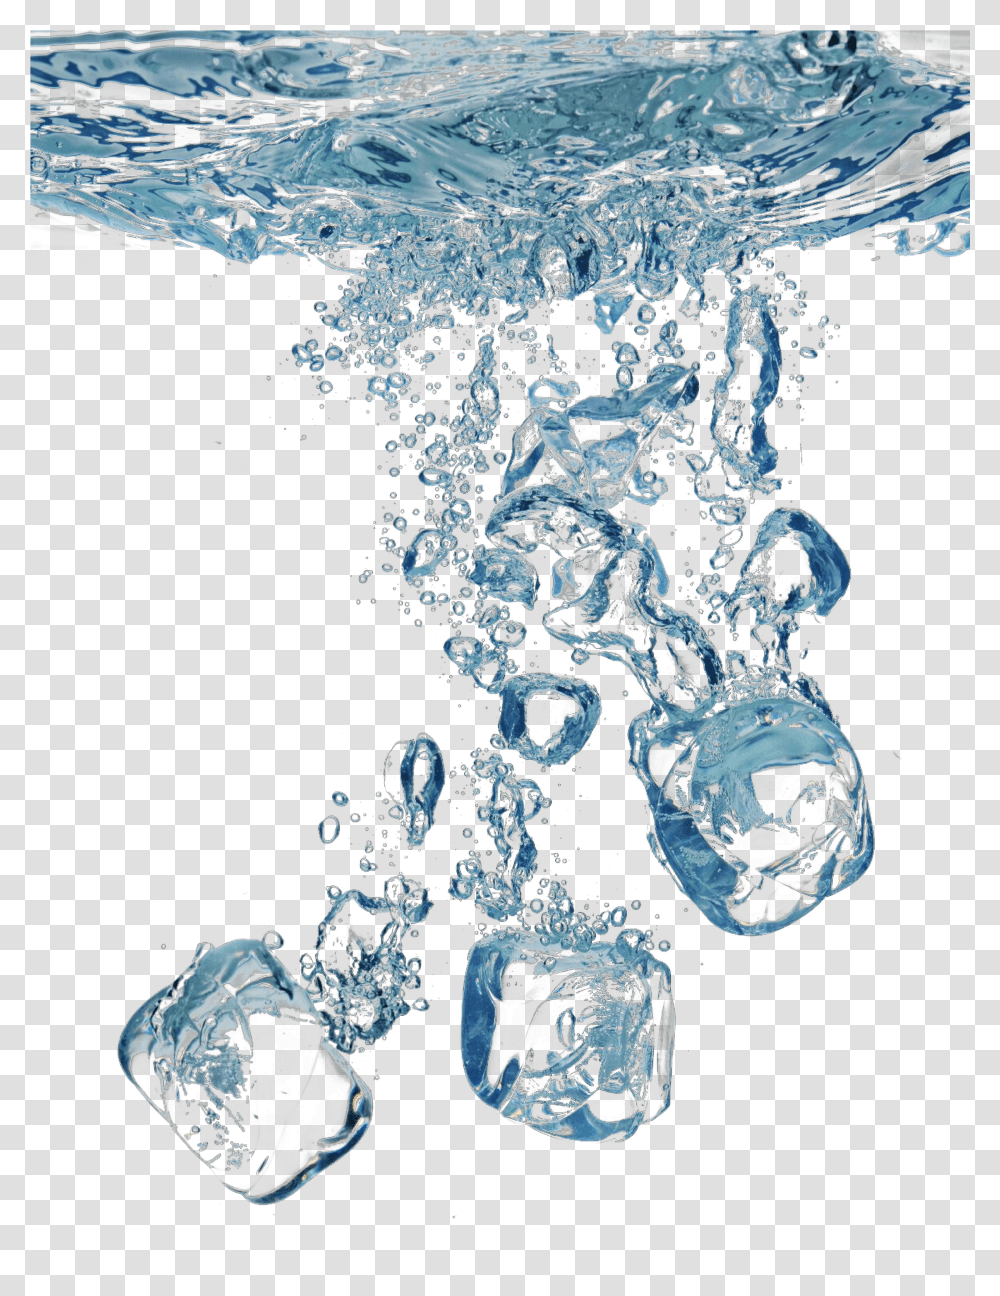 Ice Cube Water Pic All Ice Cube In Water Transparent Png